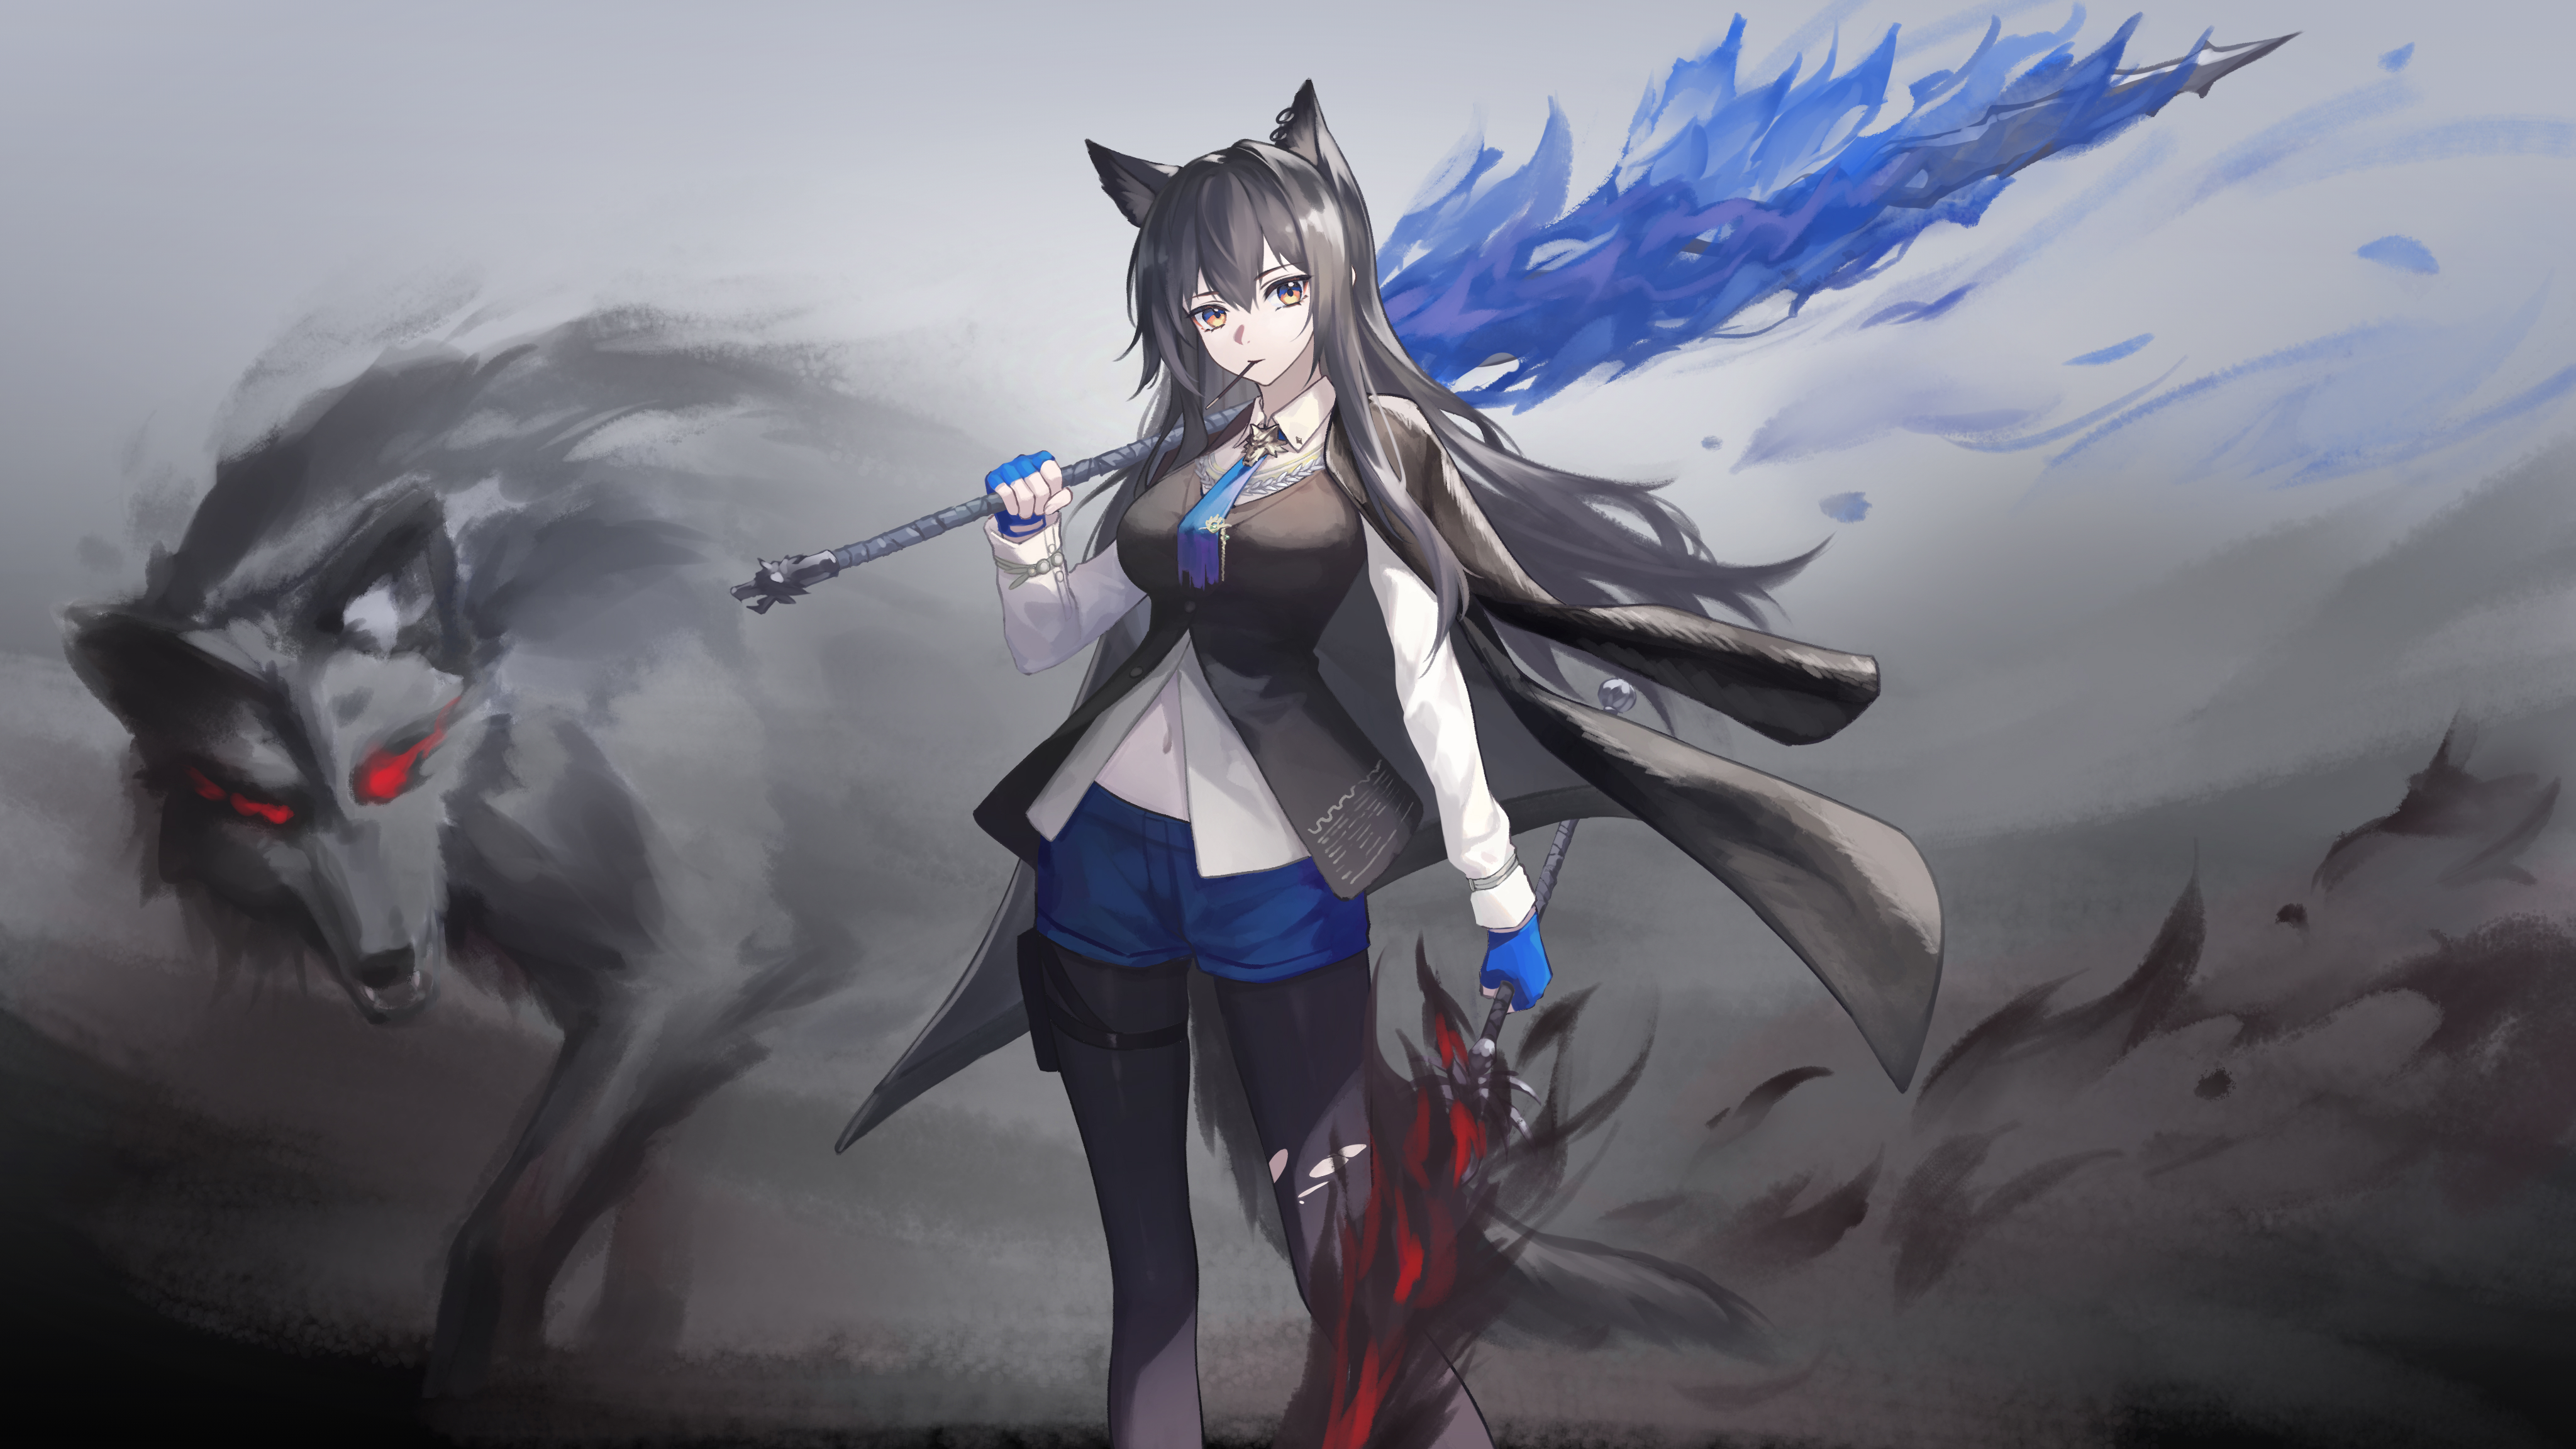 Anime Anime Girls Wolf Girls Wolf Ears Wolf Weapon Texas The Omertosa  Arknights Arknights Wallpaper - Resolution:4096x2304 - ID:1363277 -  